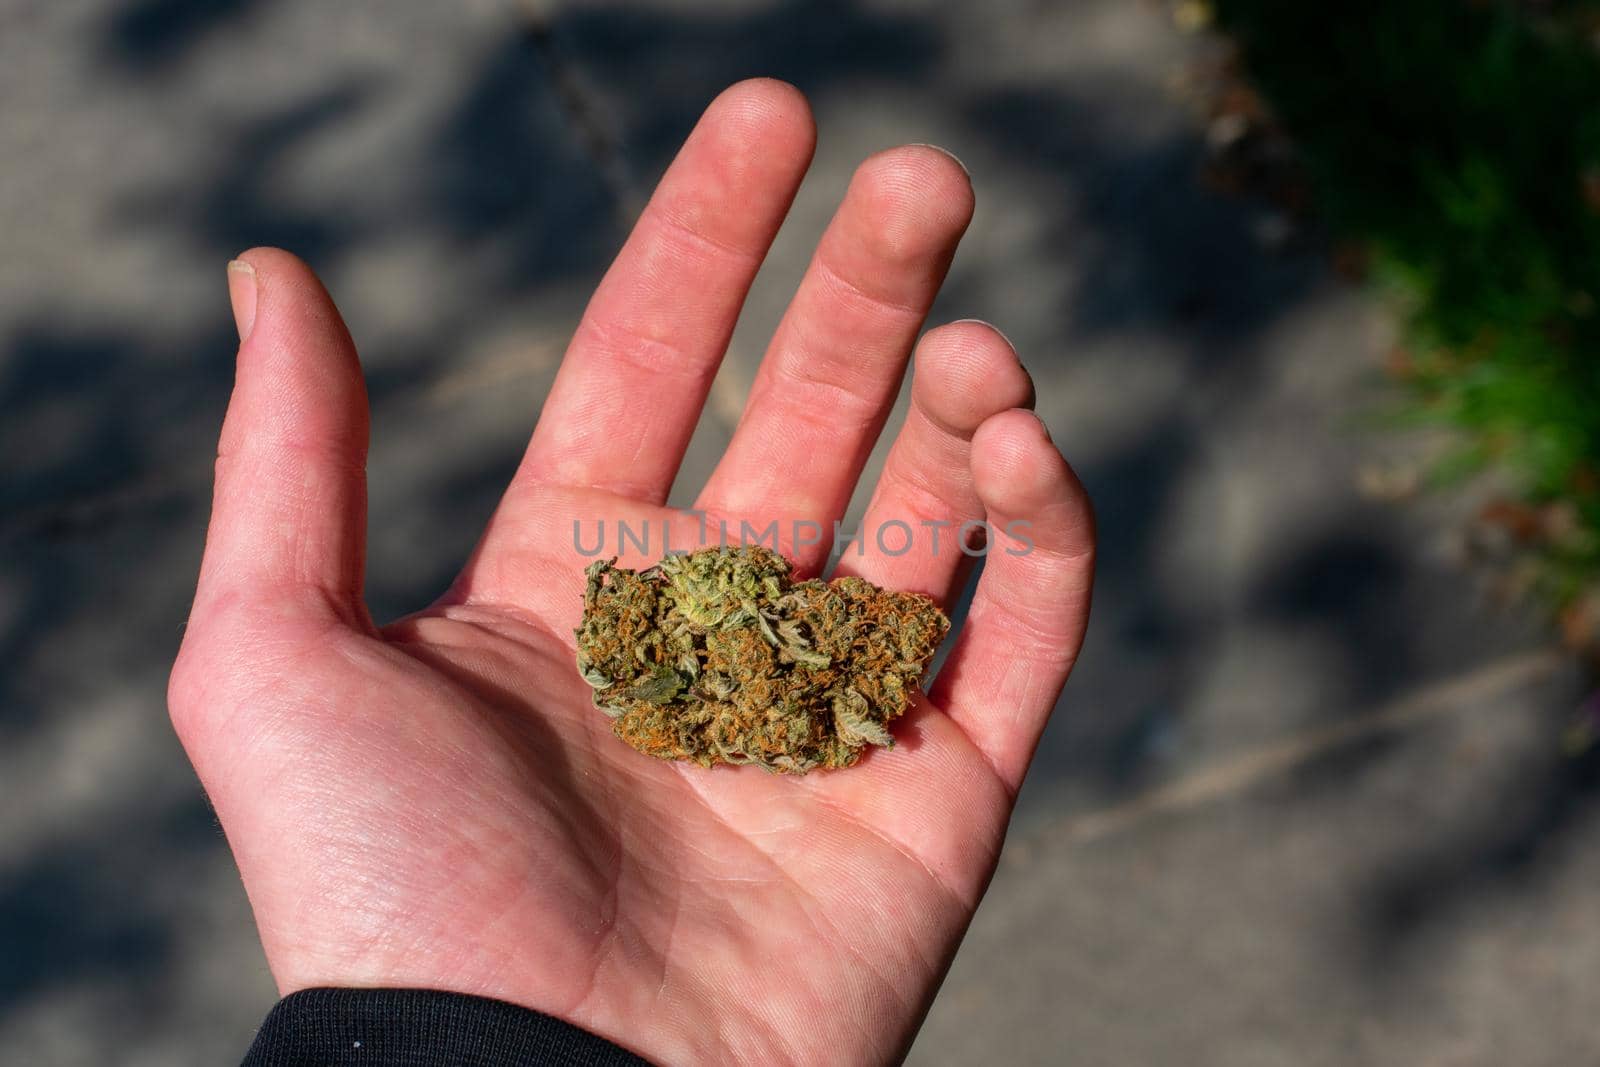 A Cannabis Nug in the Palm of a Hand With a Shaded Stone Path In the Background